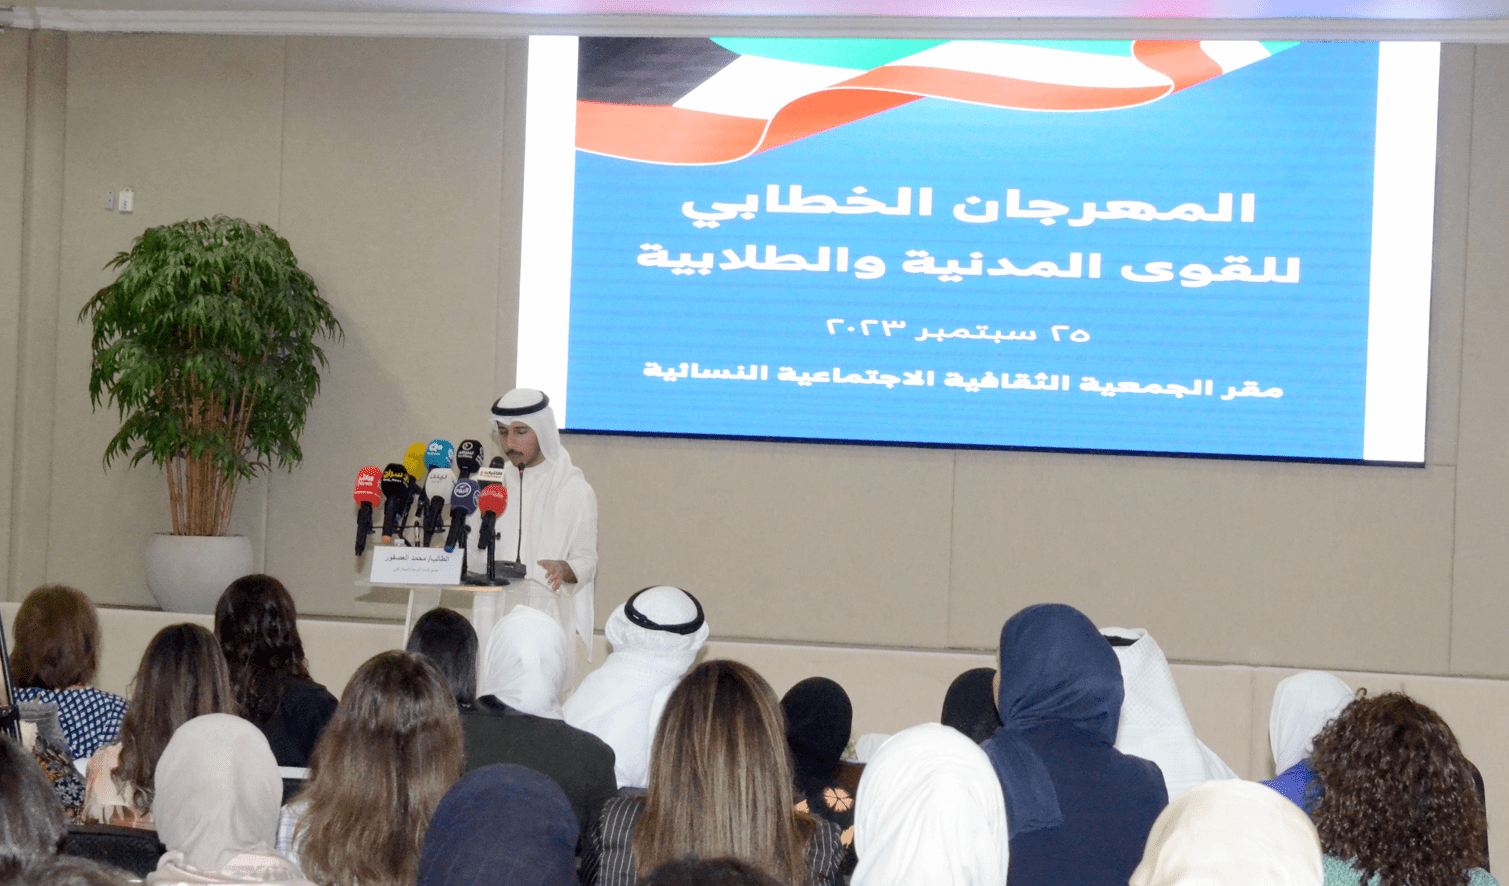 Debating Co-Education: Kuwaiti activists challenge controversial law and its impact